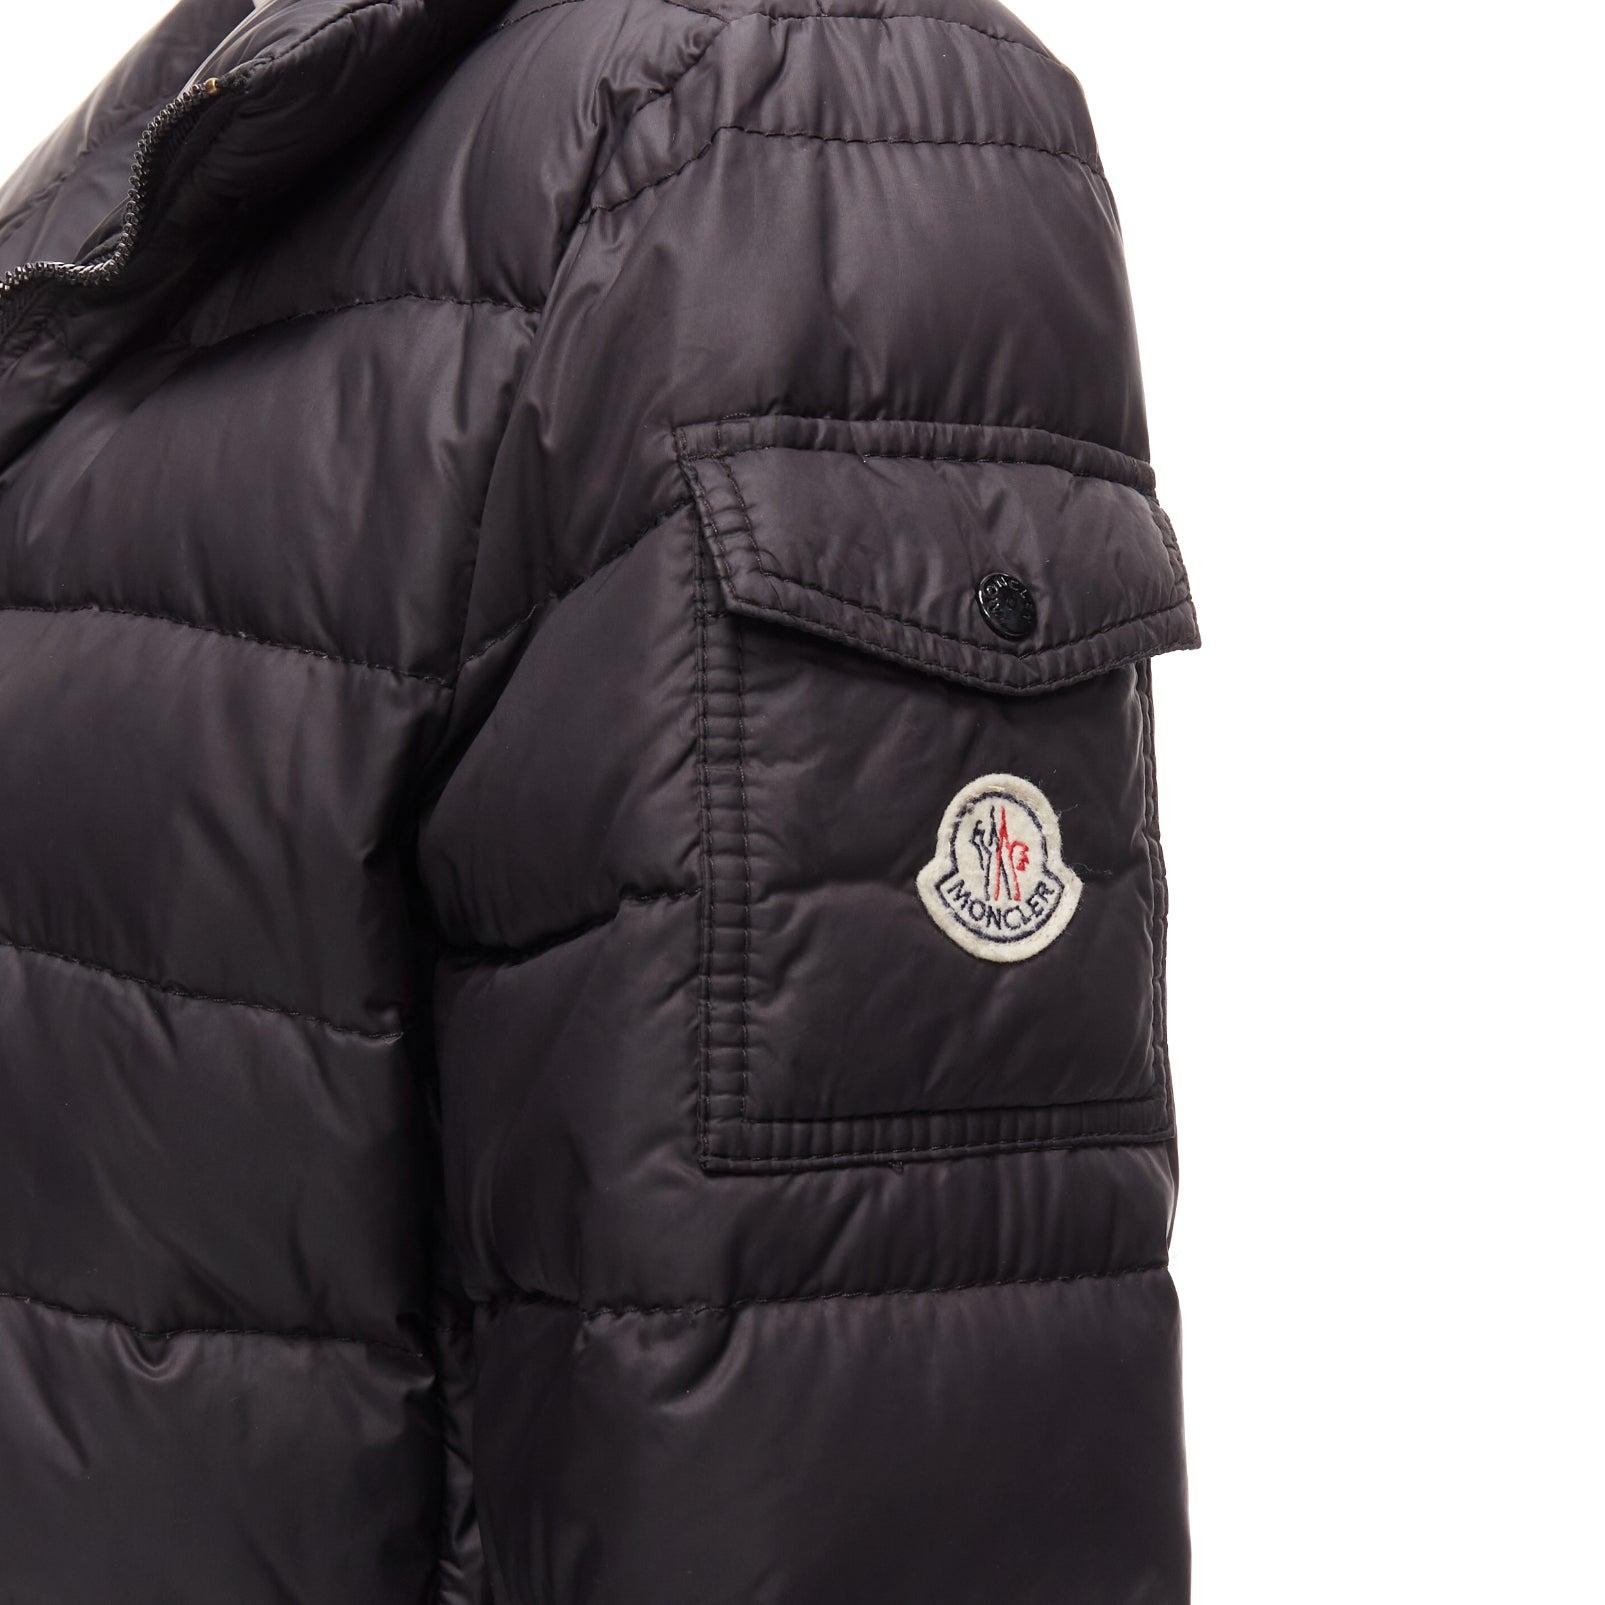 MONCLER Norme Afnor black quilted puffer zip front A line coat Sz3 L
Reference: CNPG/A00067
Brand: Moncler
Model: Norme Afnor
Material: Nylon
Color: Black
Pattern: Solid
Closure: Zip
Lining: Black Fabric
Made in: Moldova

CONDITION:
Condition: Fair,